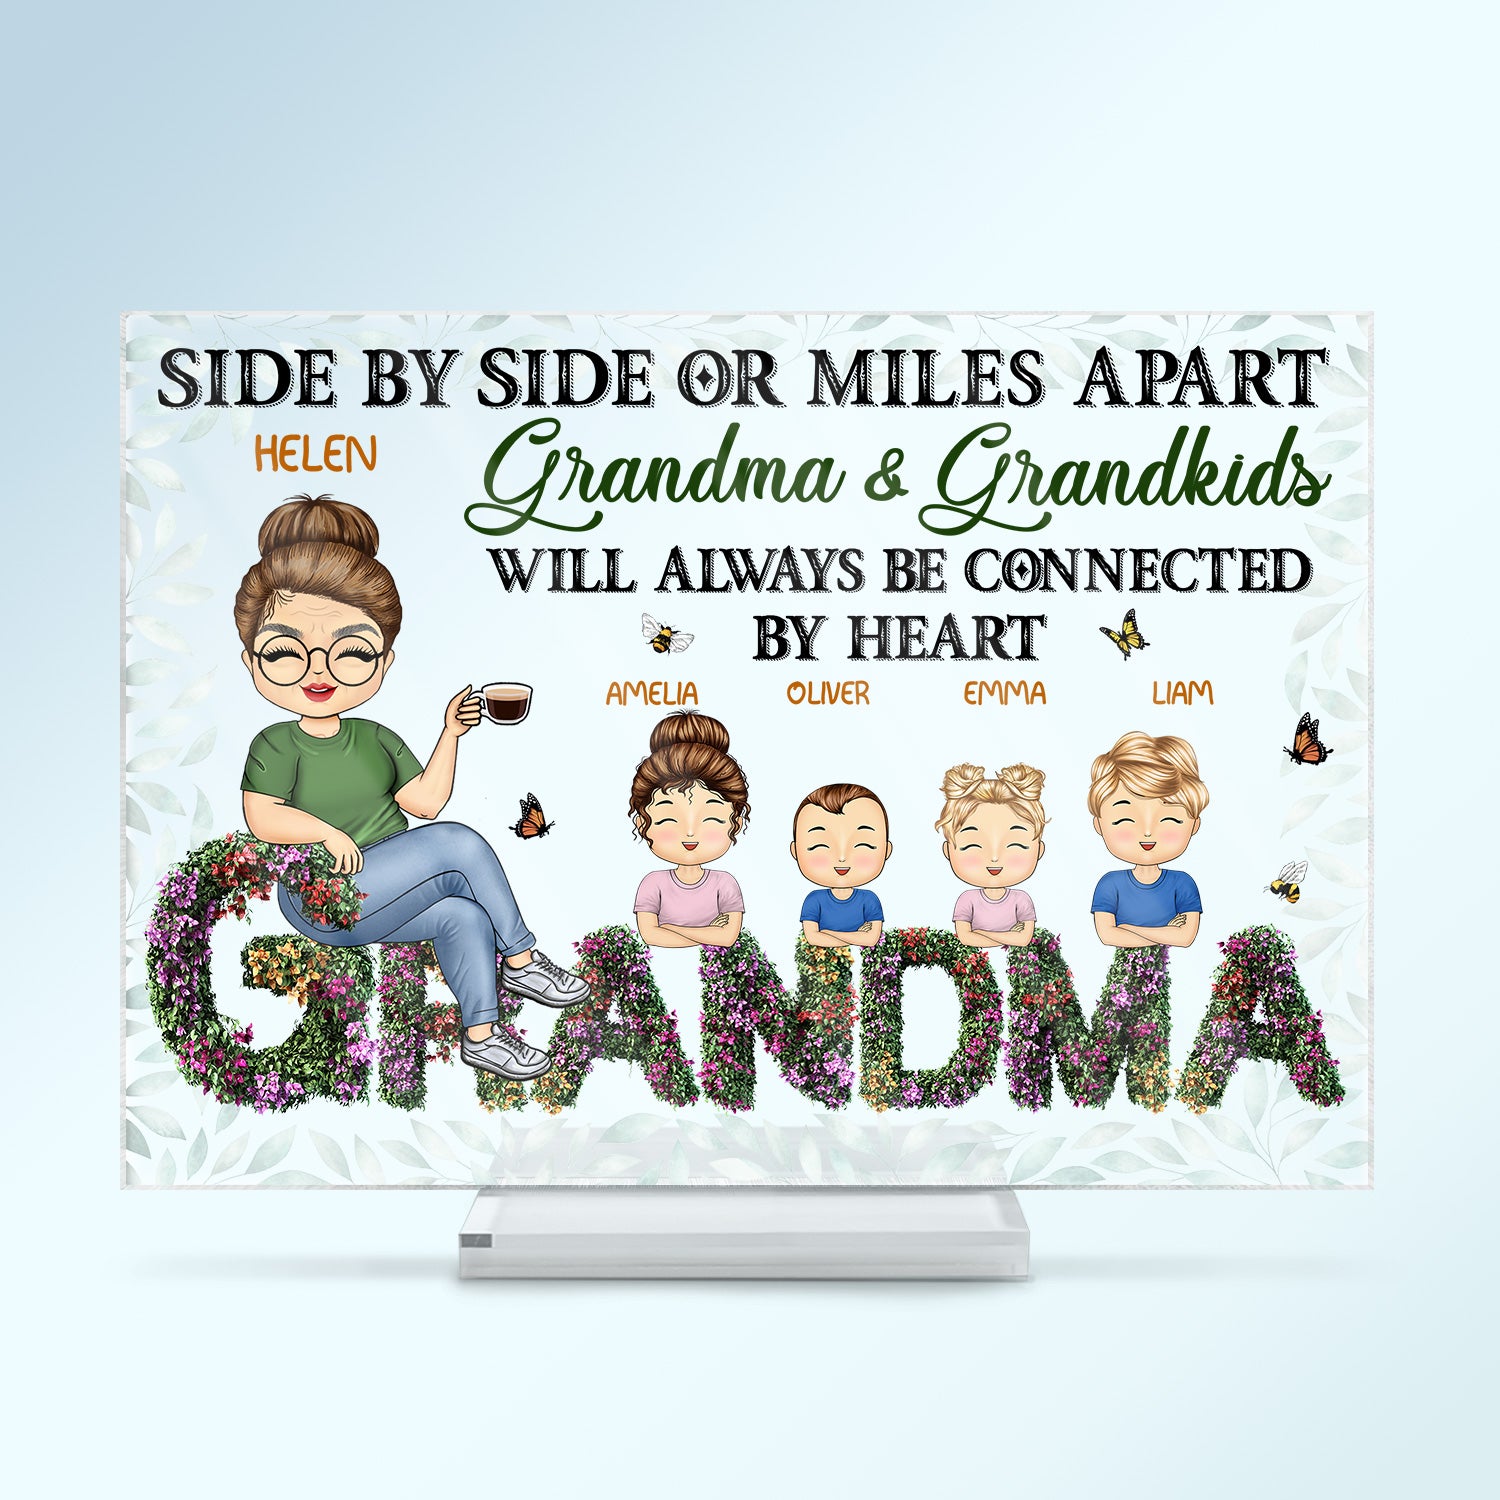 Grandma Side By Side Or Miles Apart - Birthday, Loving Gift For Grandmother, Nana, Mom, Mother - Personalized Custom Horizontal Rectangle Acrylic Plaque